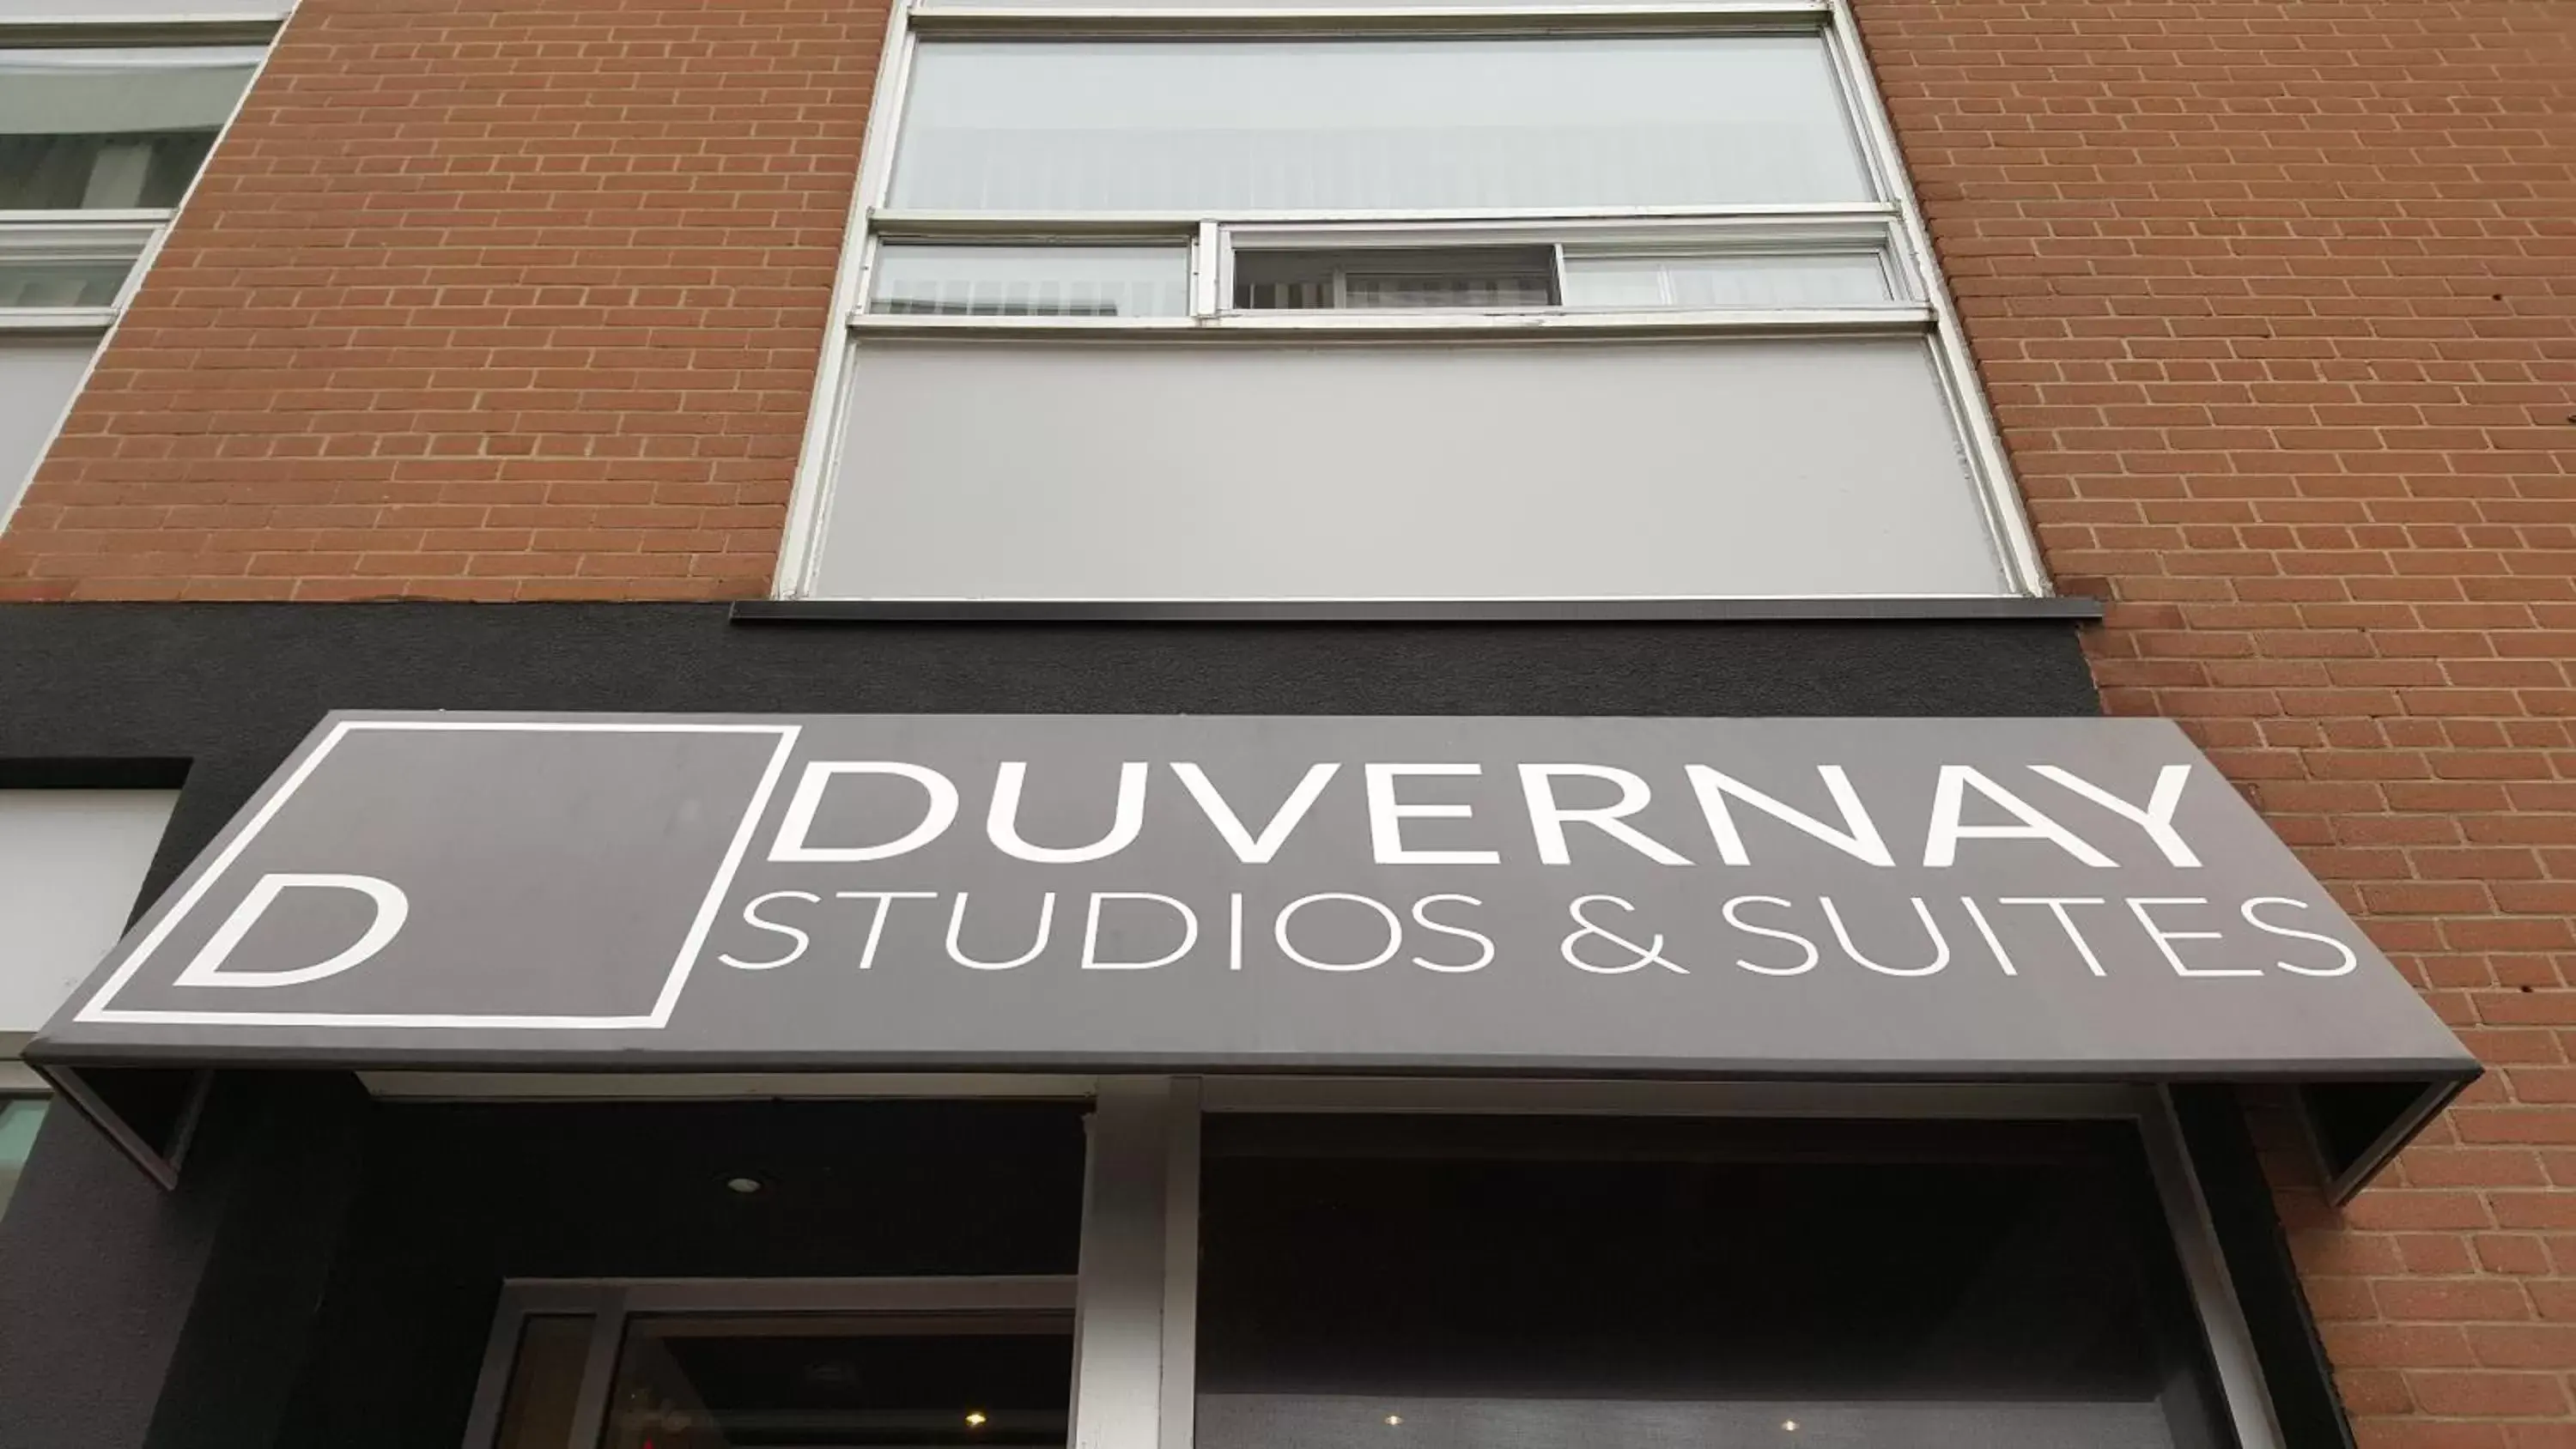 Property logo or sign in Duvernay Studios and Suites